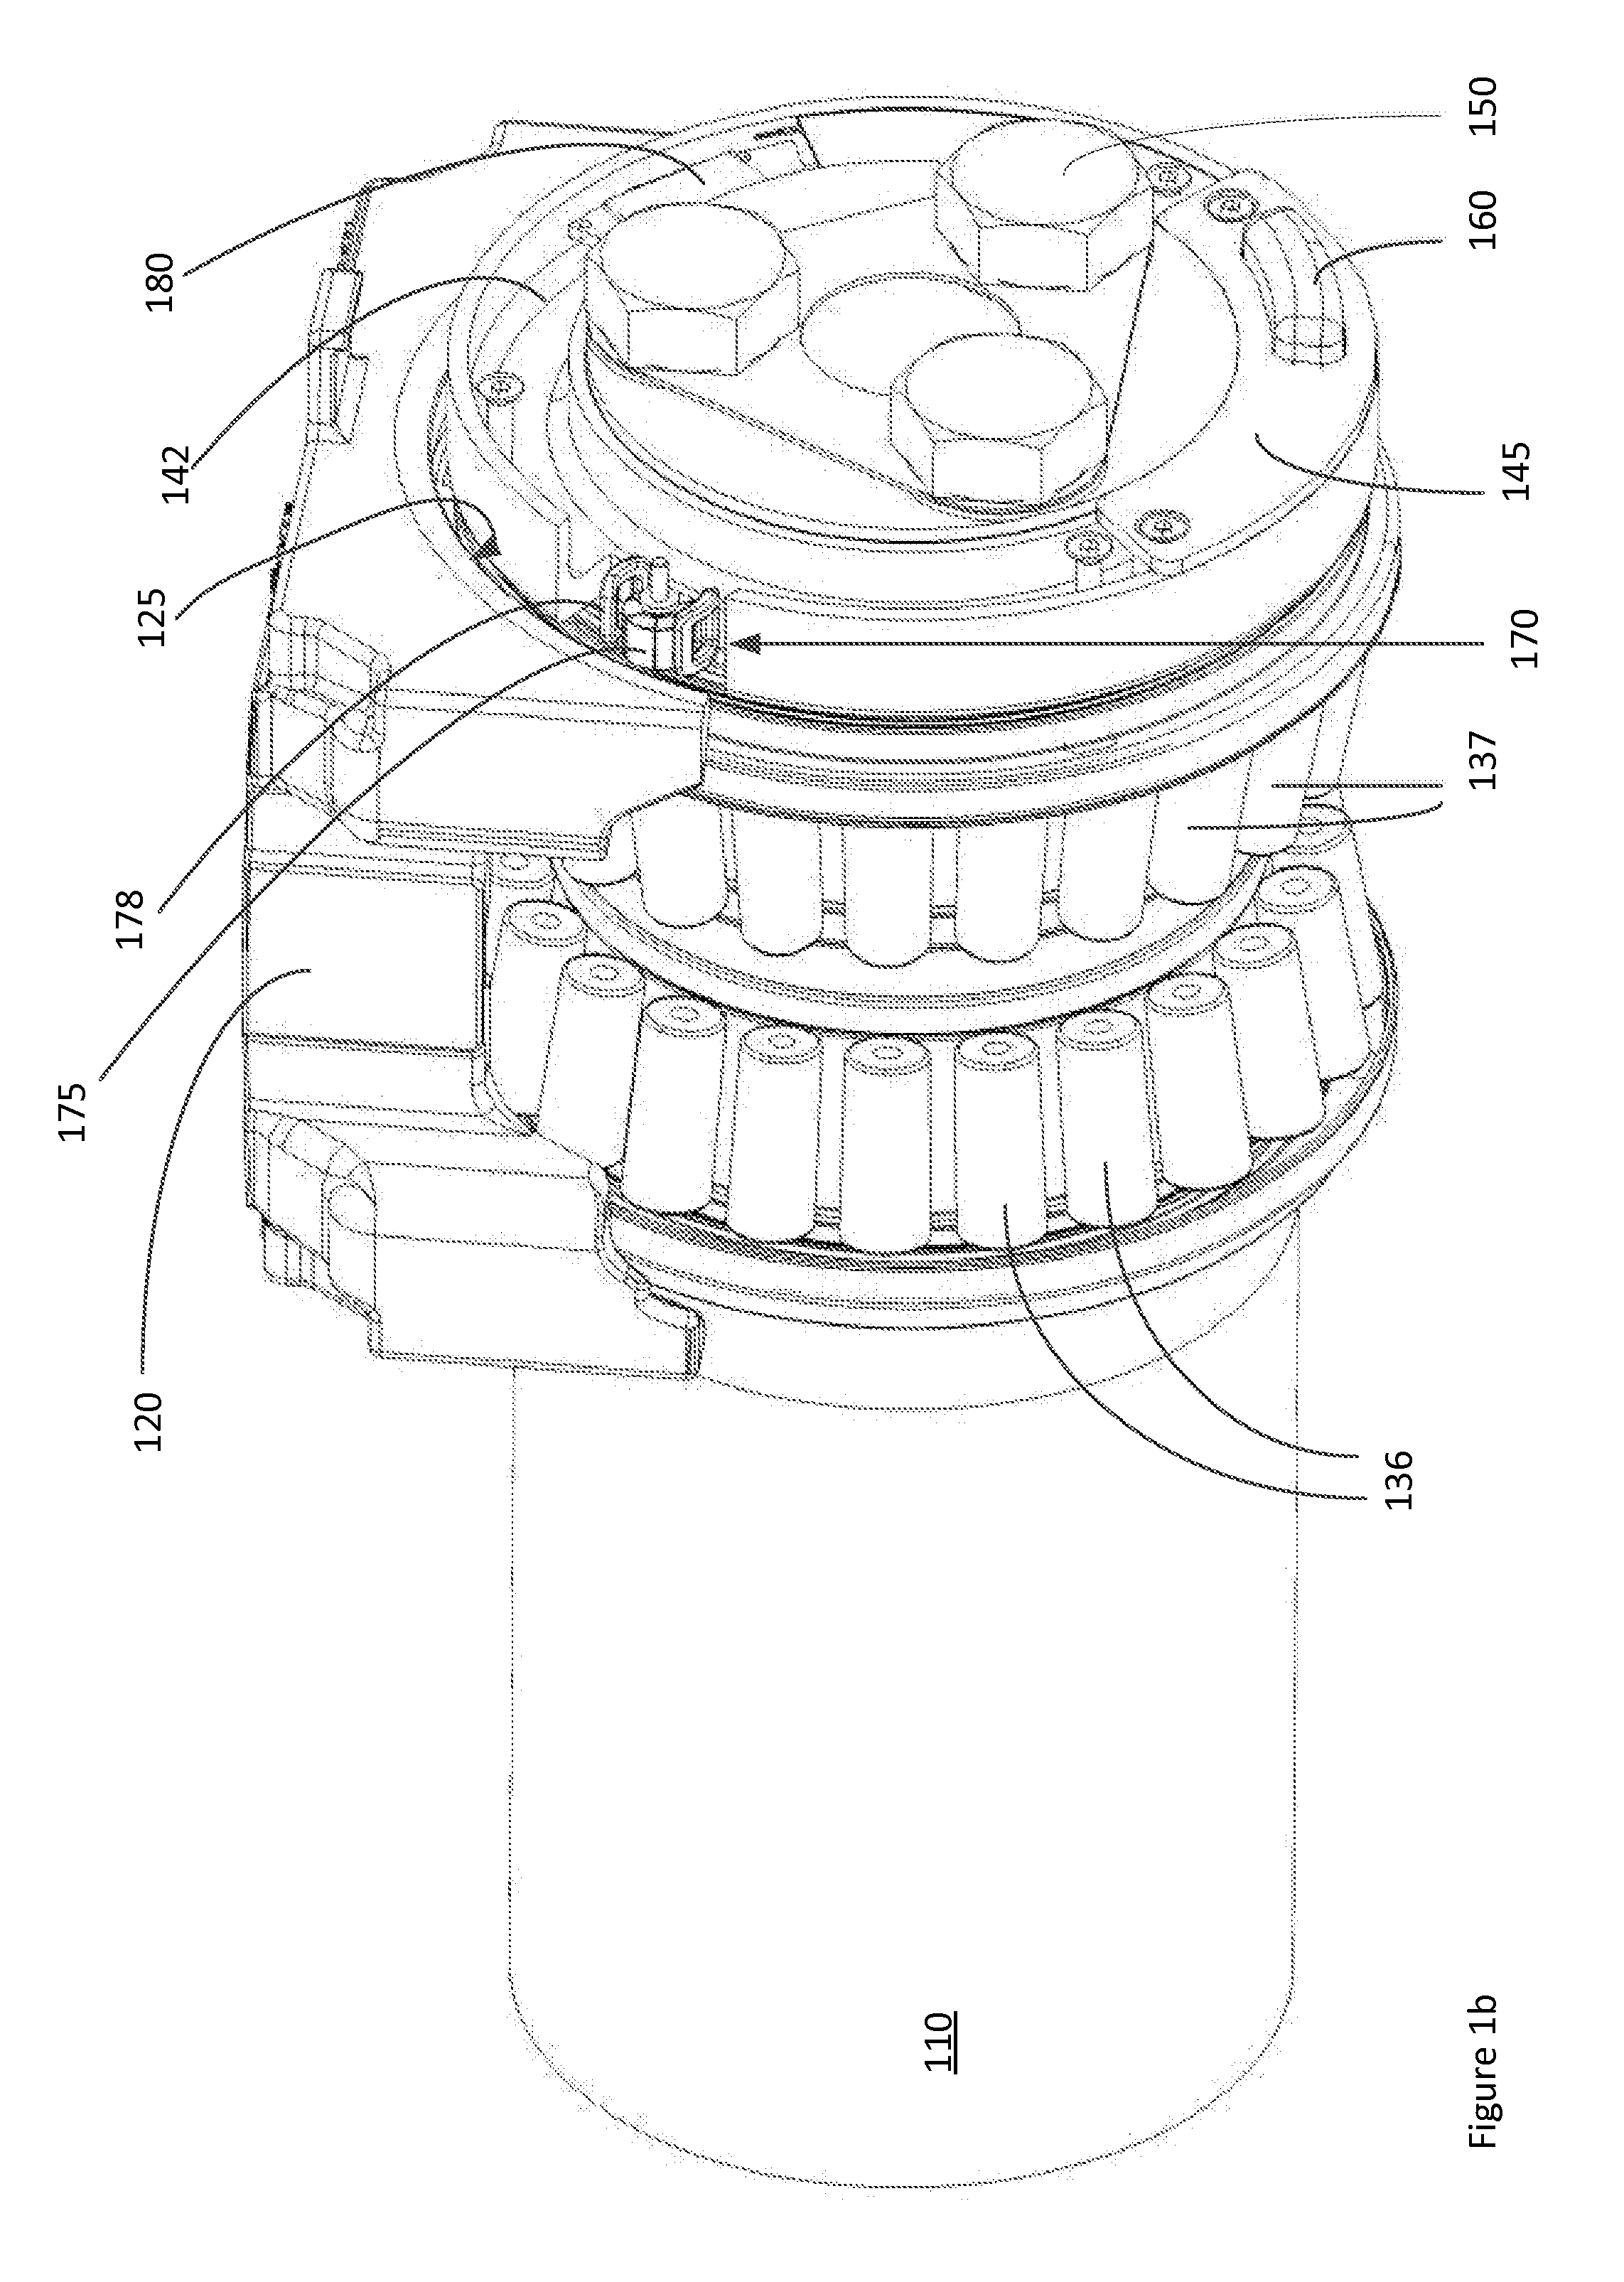 Bearing assembly with integrated generator